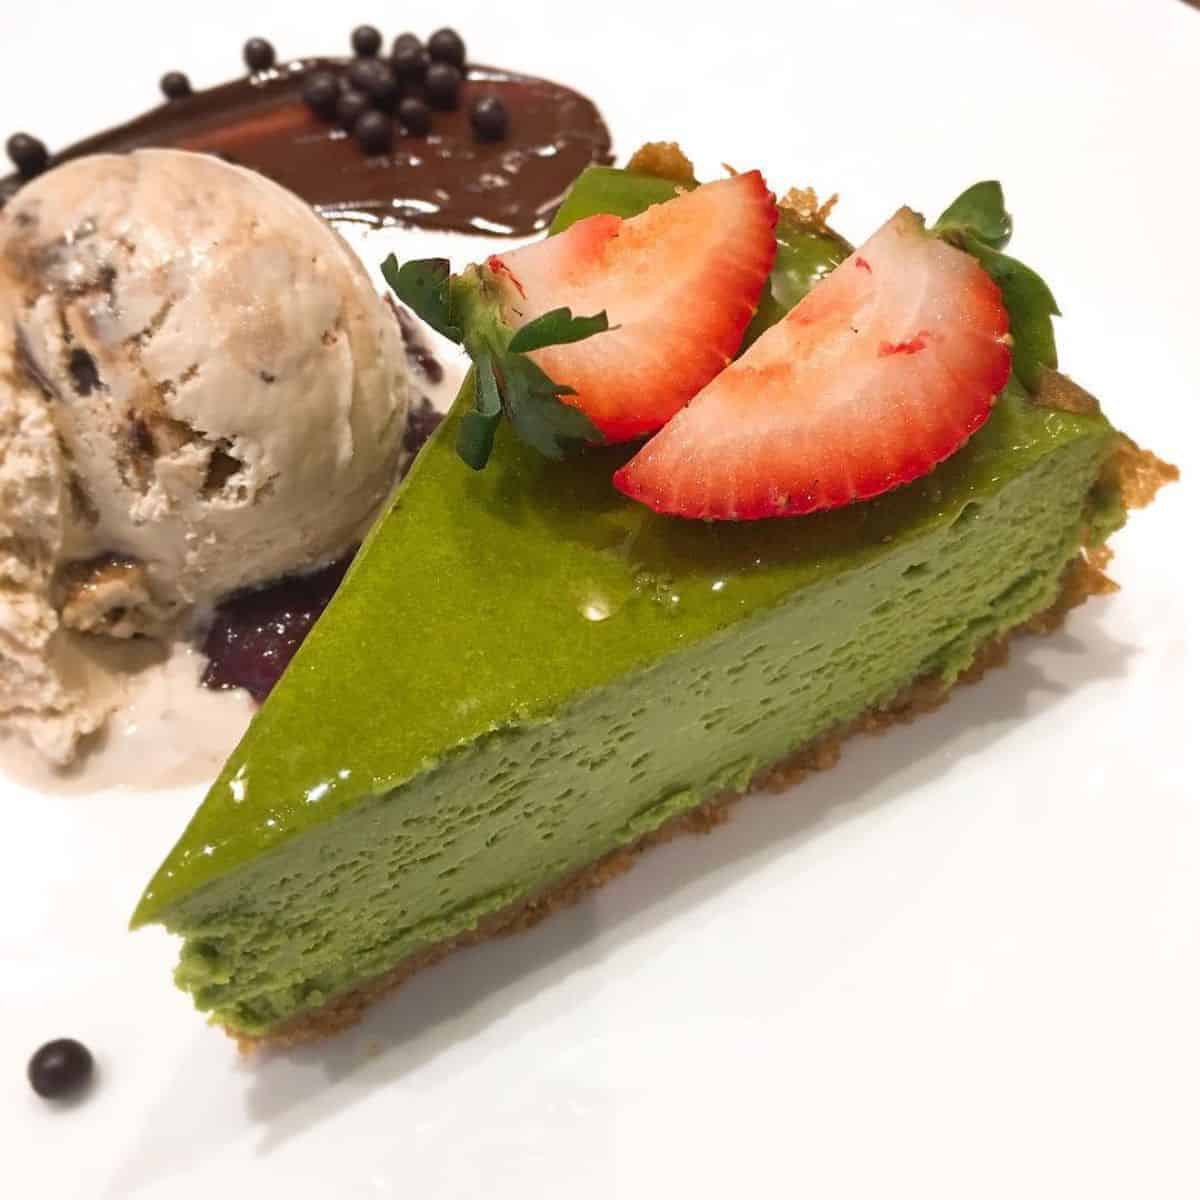 One slice of a green dessert with slices of fresh strawberries on top paired with ice cream